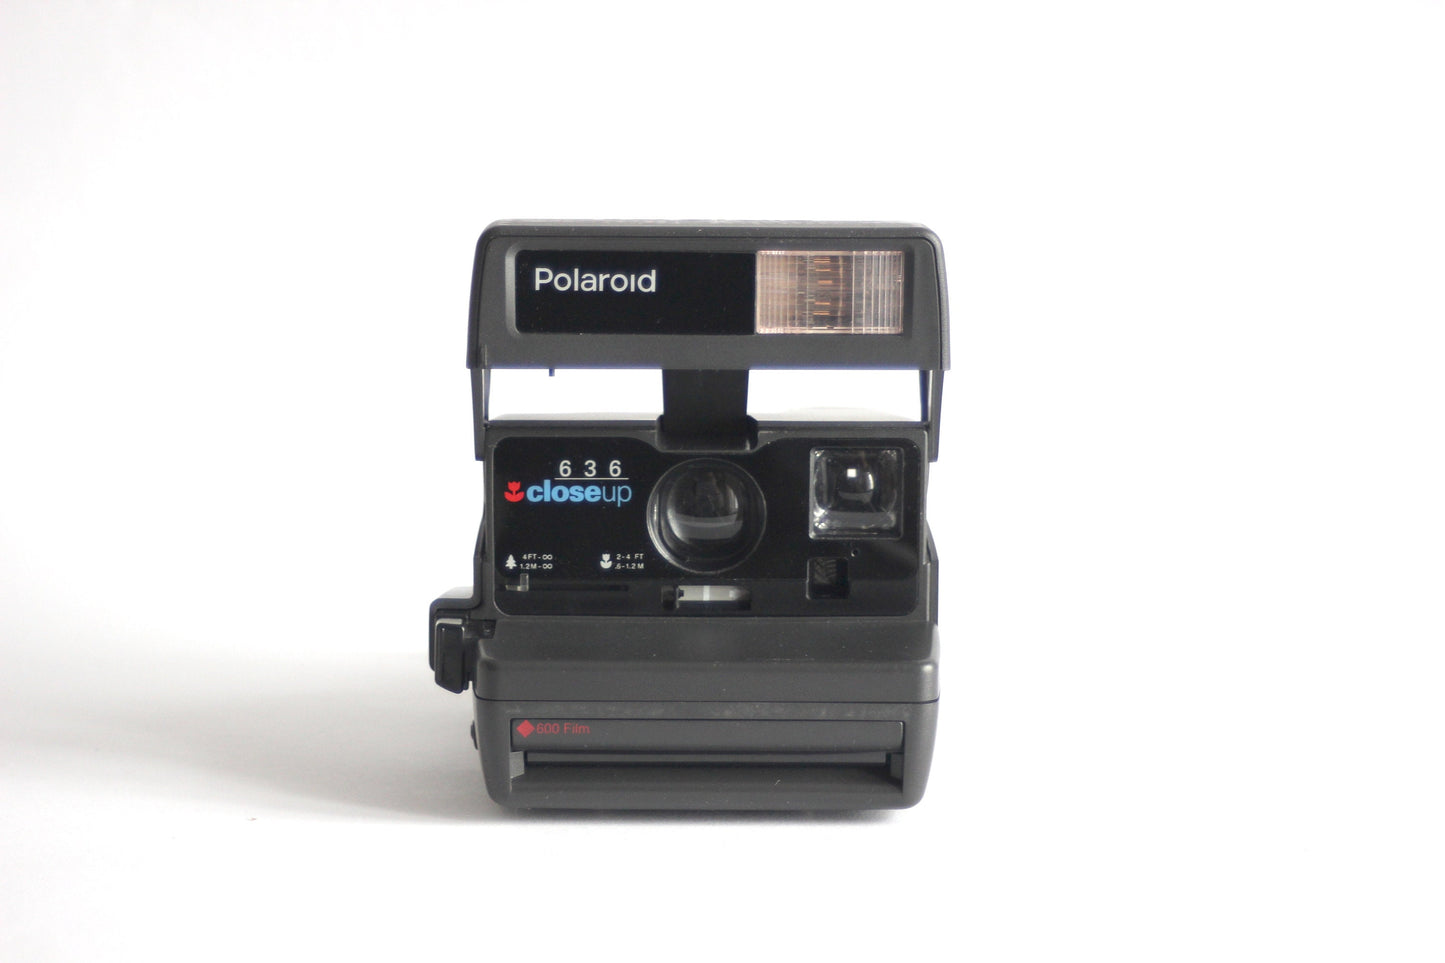 Polaroid 636 Close up with imperfection- Includes original packaging